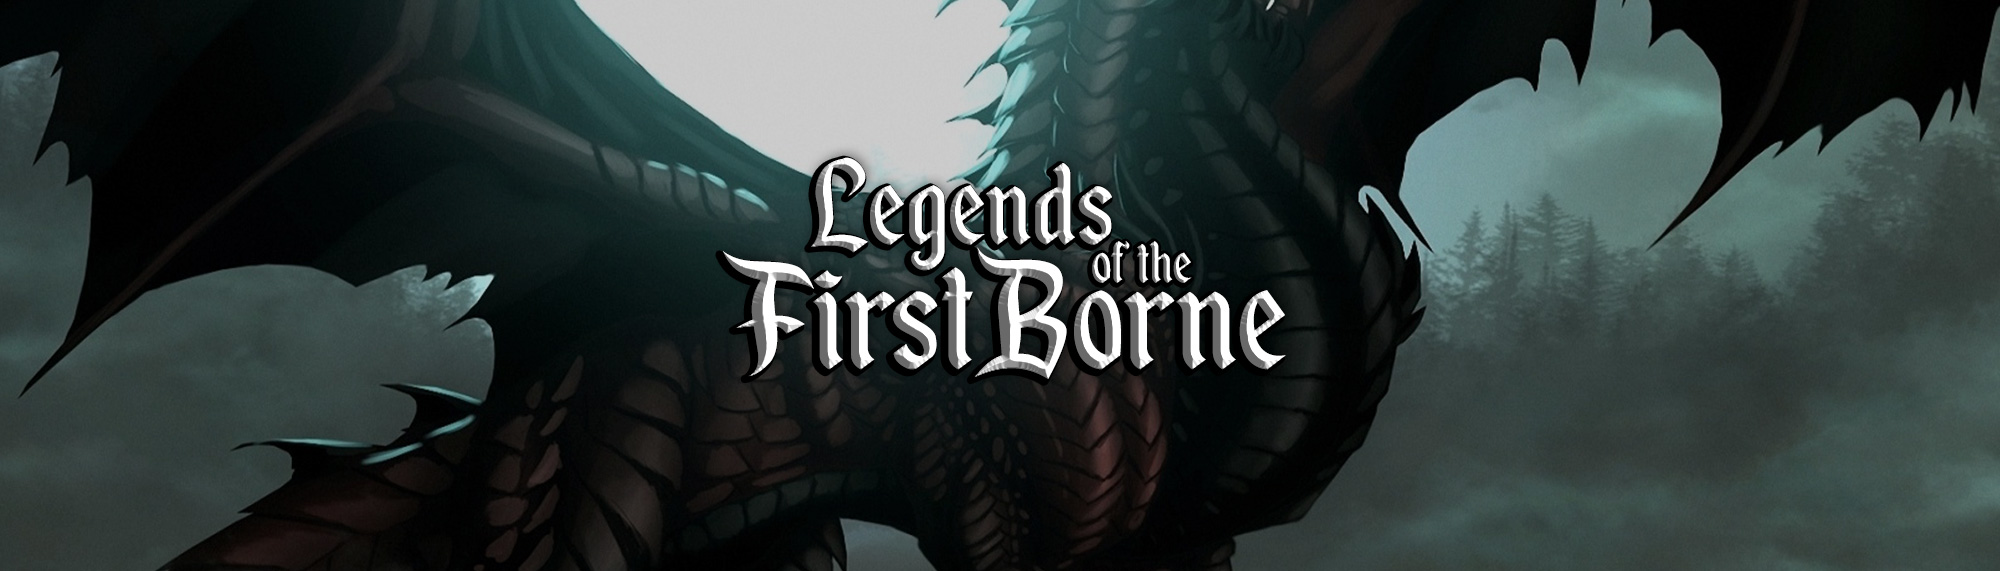 Legends of the FirstBorne